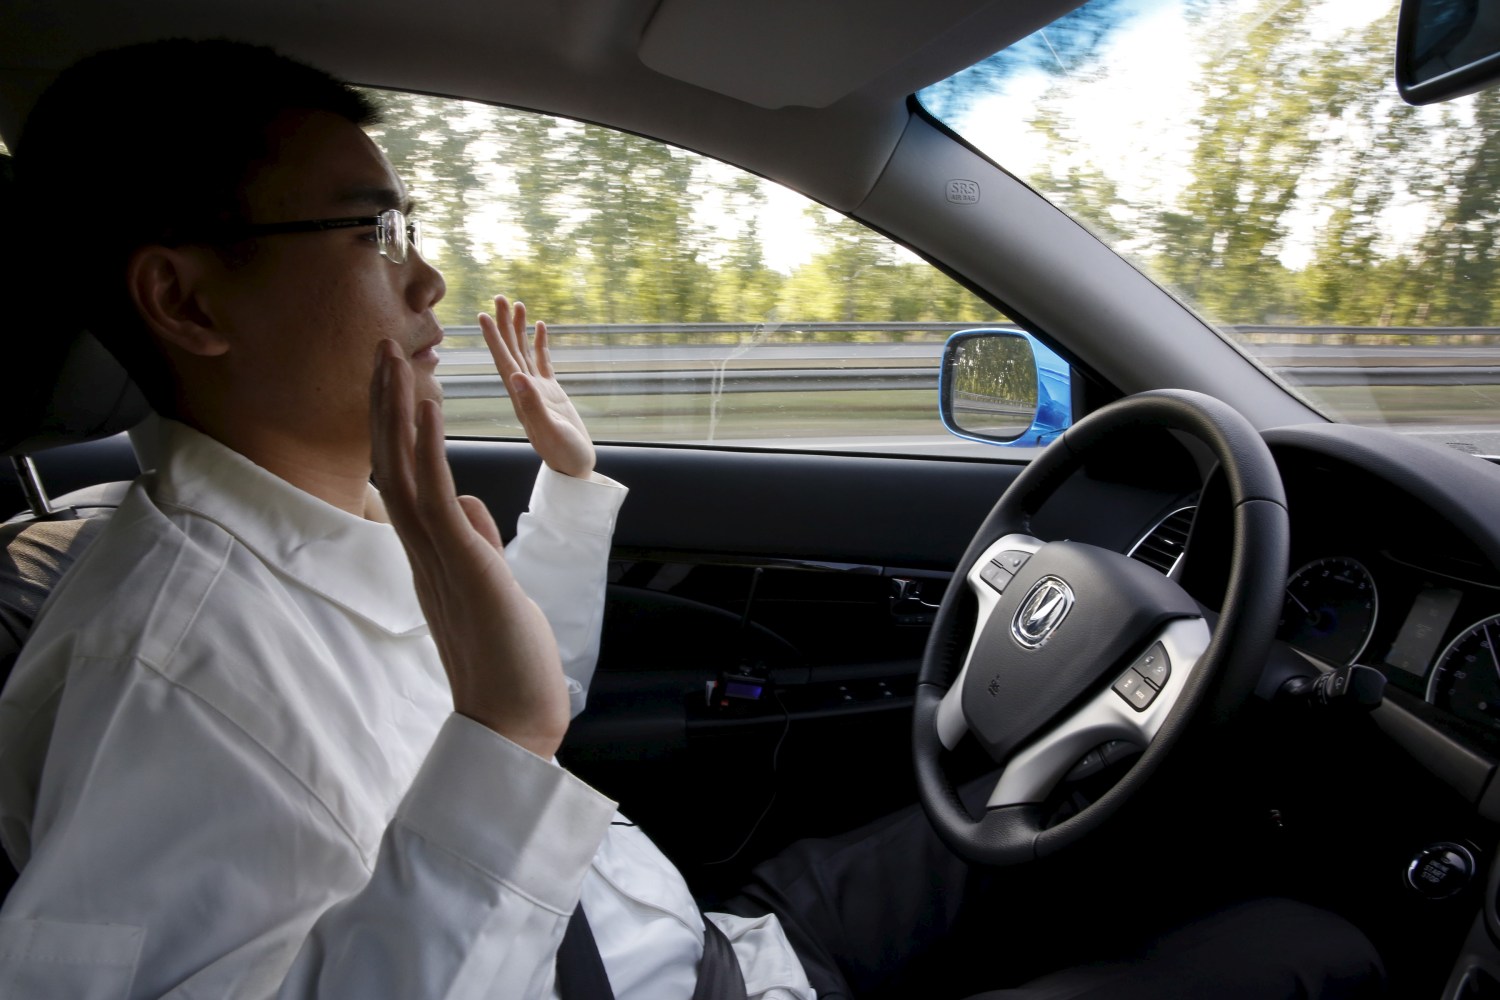 Li Zengwen, a development engineer at Changan Automobile, lifts his hands off the steering wheel as the car is on self-driving mode during a test drive on a highway in Beijing